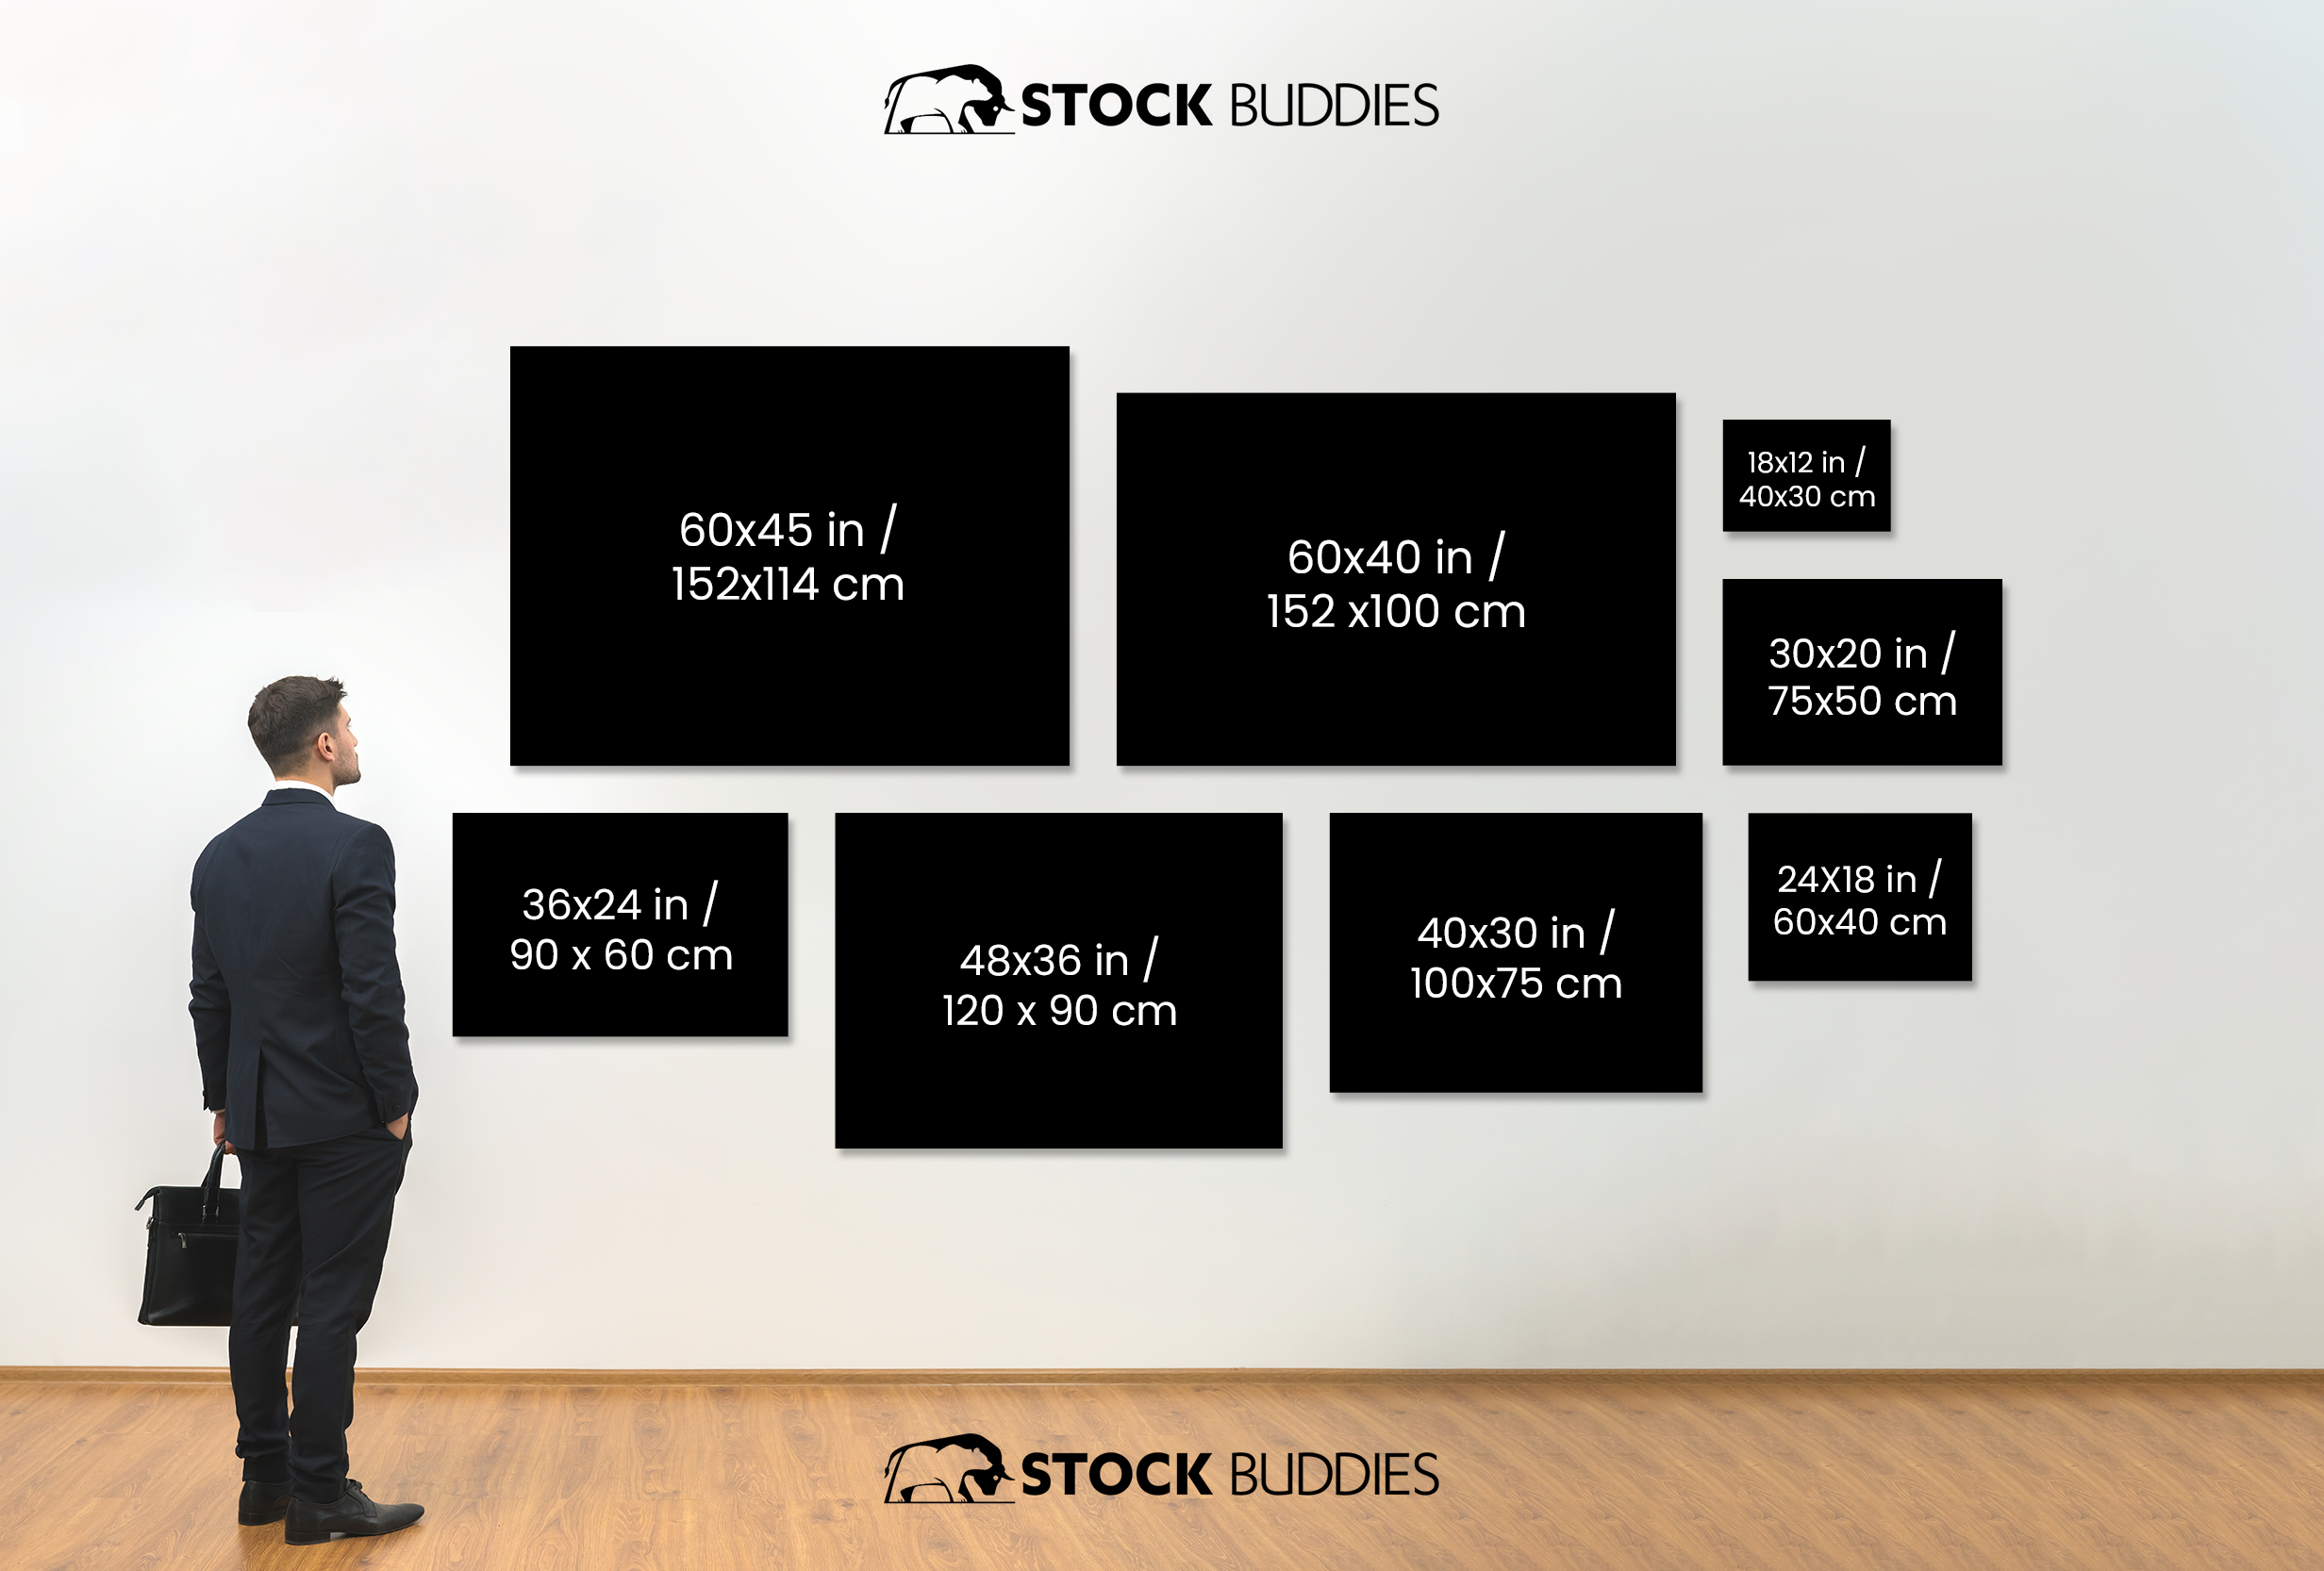 The Dollar Vision - Stock Buddies -Canvas Wraps